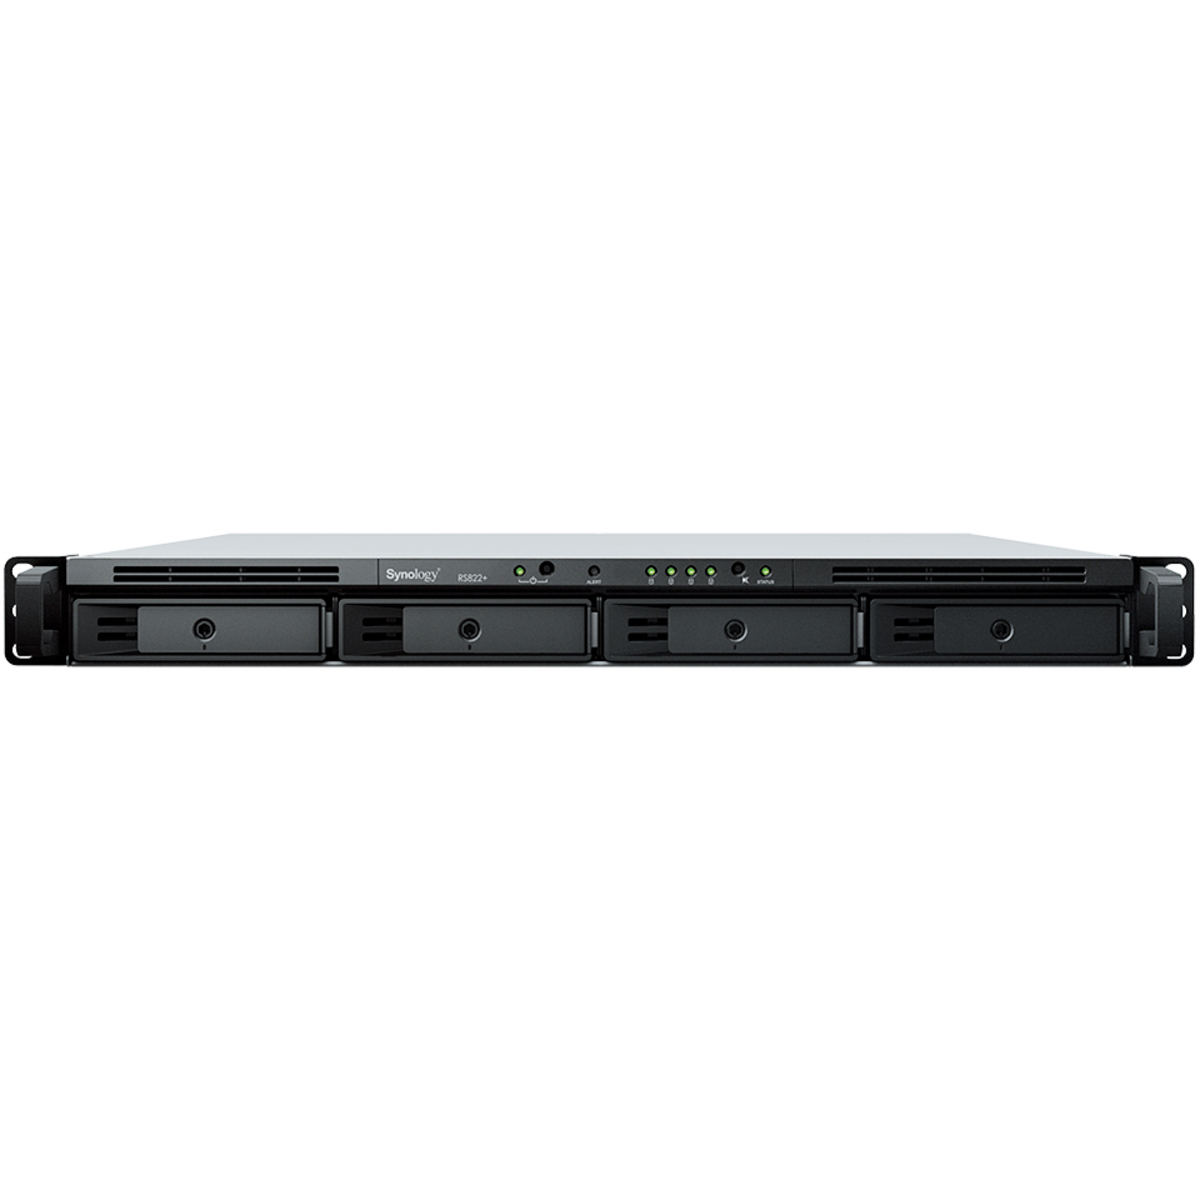 Synology RackStation RS822+ 72tb 4-Bay RackMount Multimedia / Power User / Business NAS - Network Attached Storage Device 3x24tb Seagate EXOS X24 ST24000NM002H 3.5 7200rpm SATA 6Gb/s HDD ENTERPRISE Class Drives Installed - Burn-In Tested RackStation RS822+